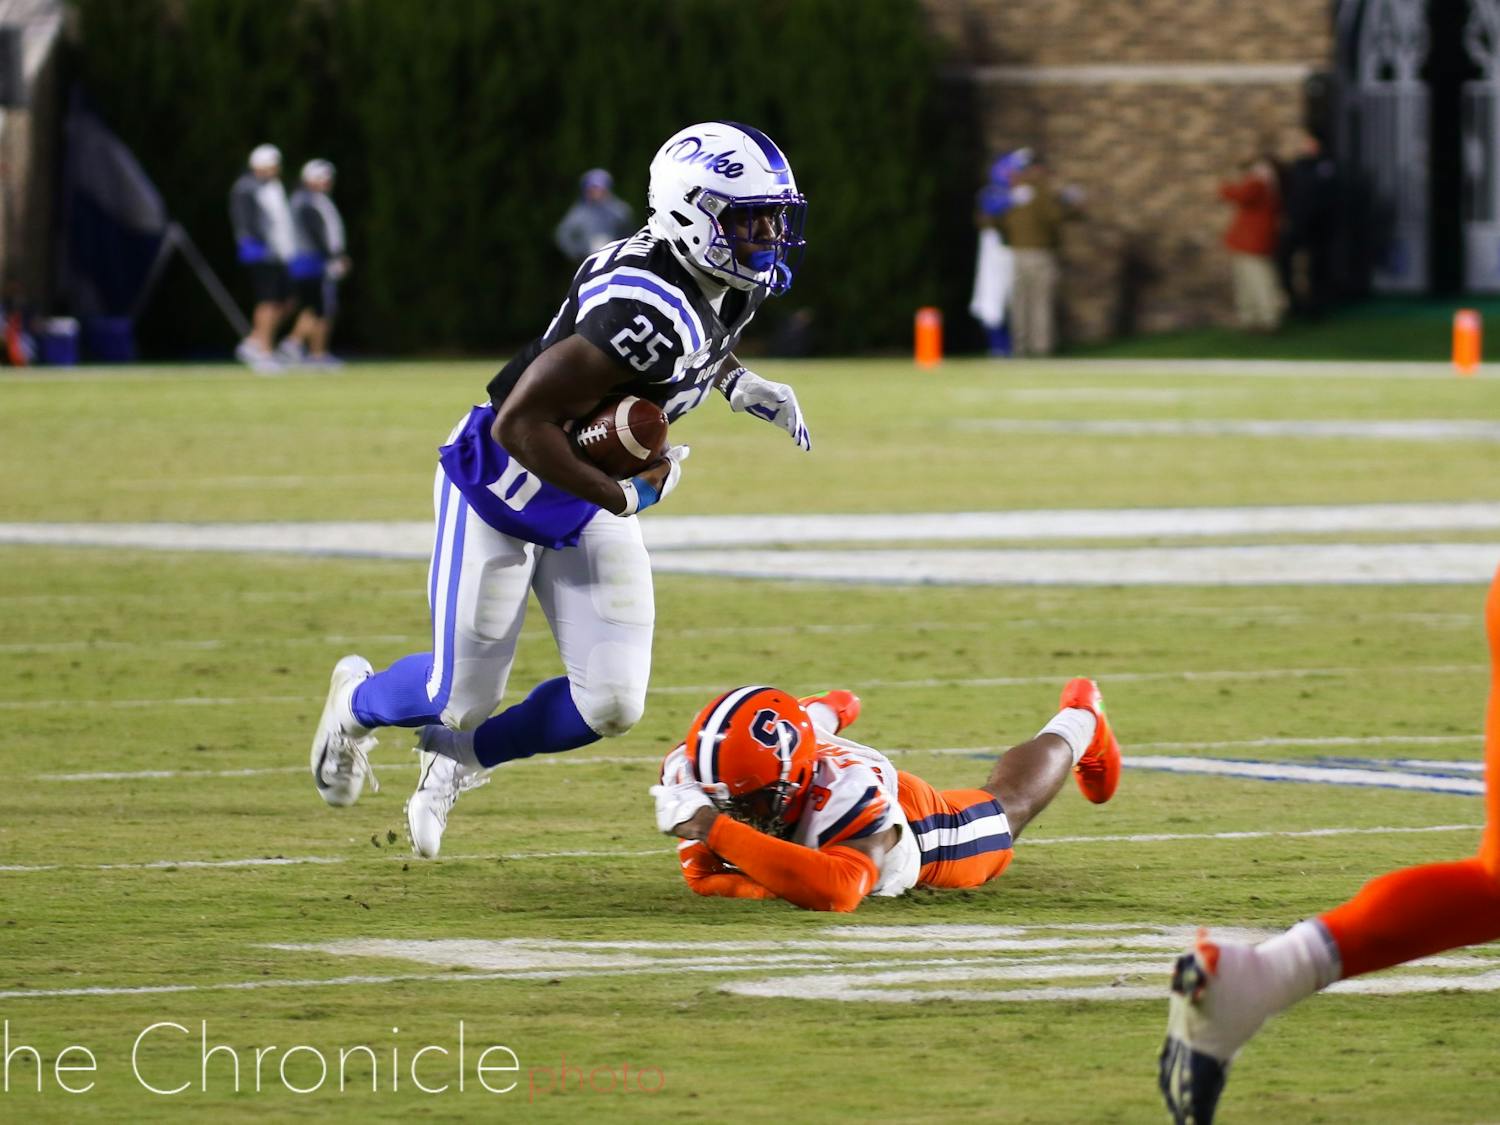 Deon Jackson and the Duke rushing attack could not get going against the Orange's typically porous rushing defense.